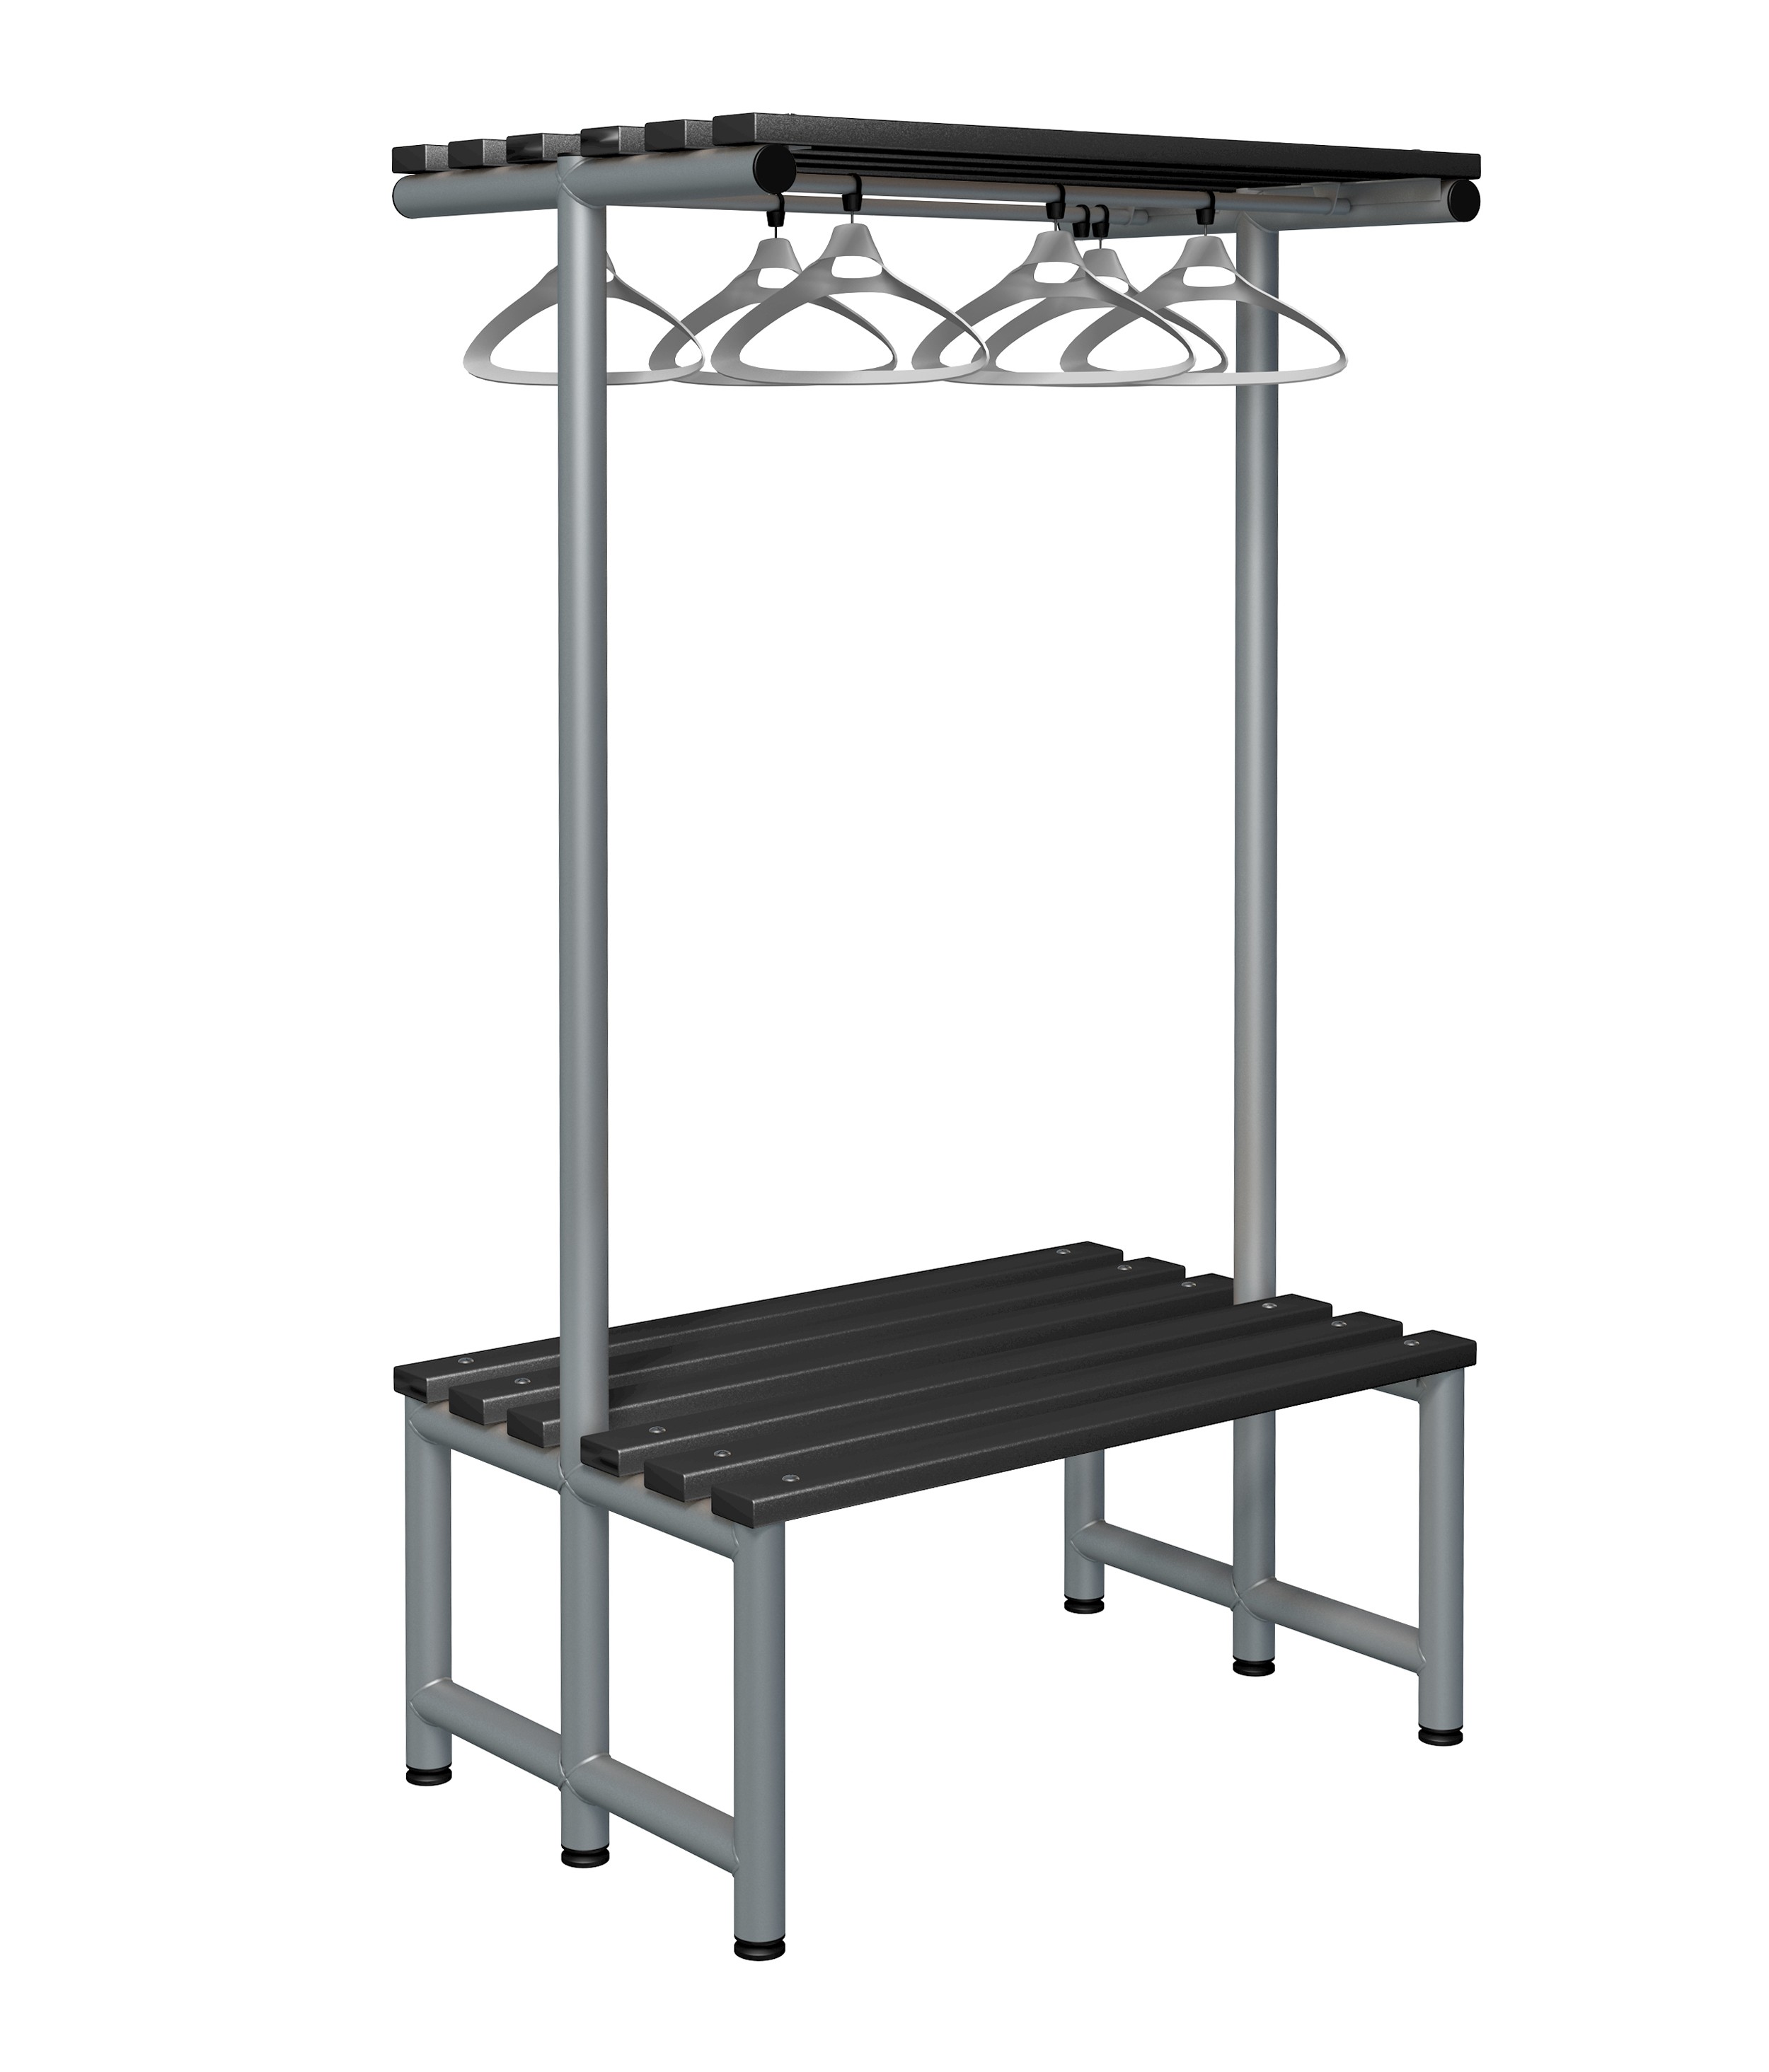 Double Sided Overhead Hanging Bench - Type G